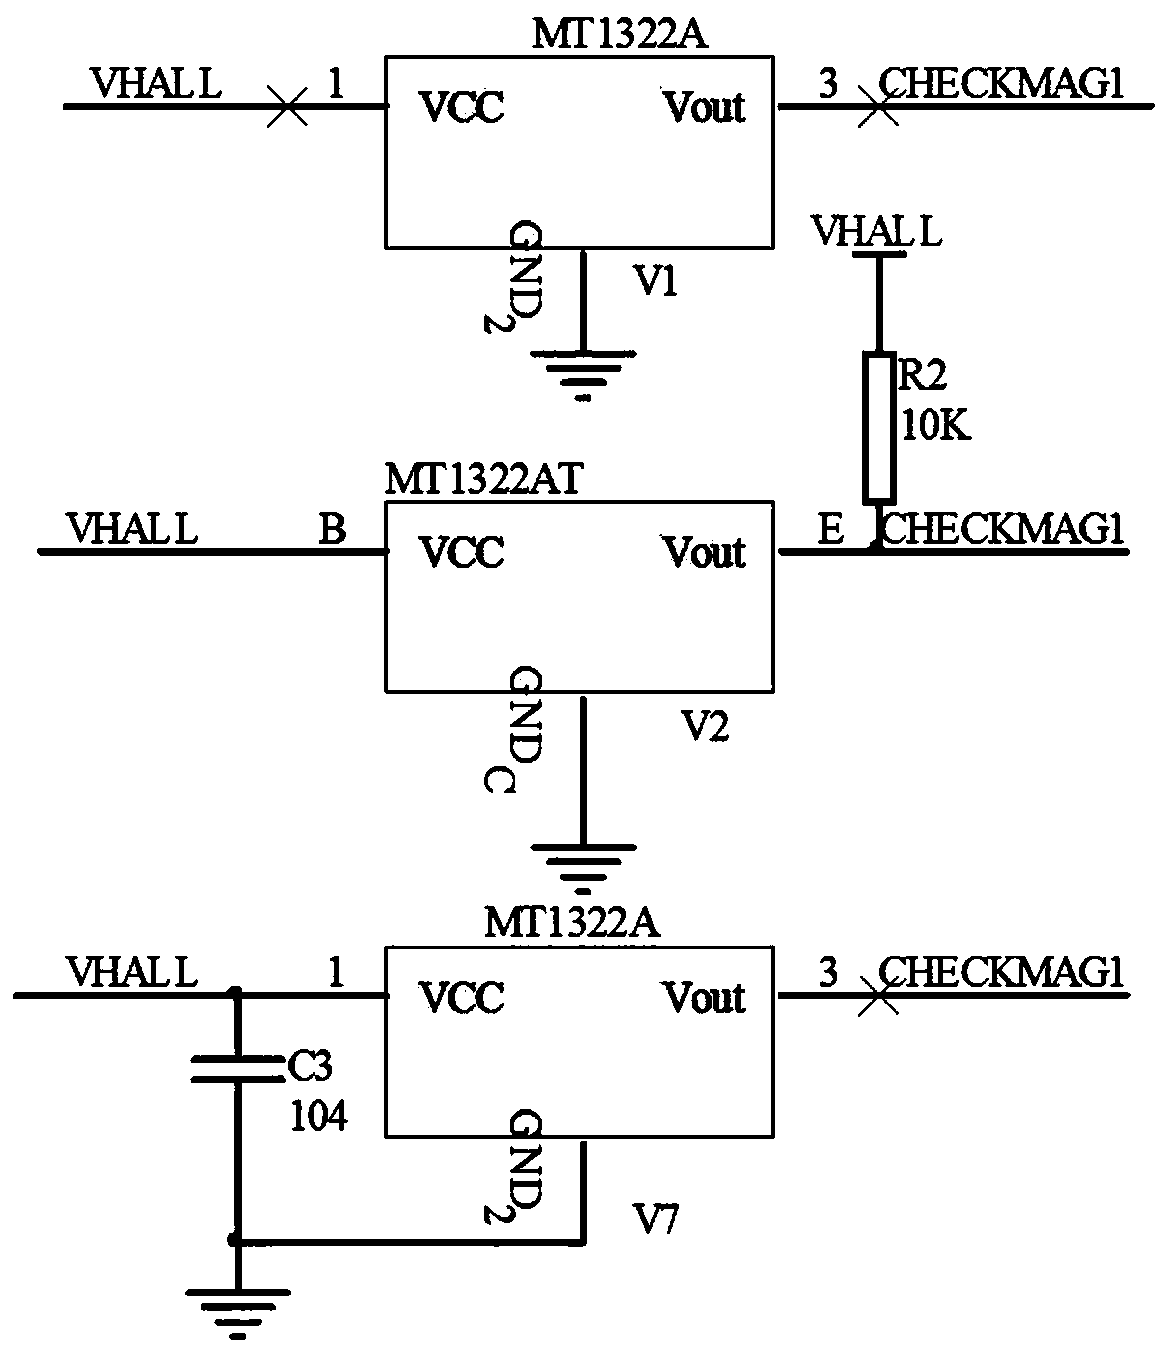 Non-contact electricity-stealing prevention real-time monitoring device and method